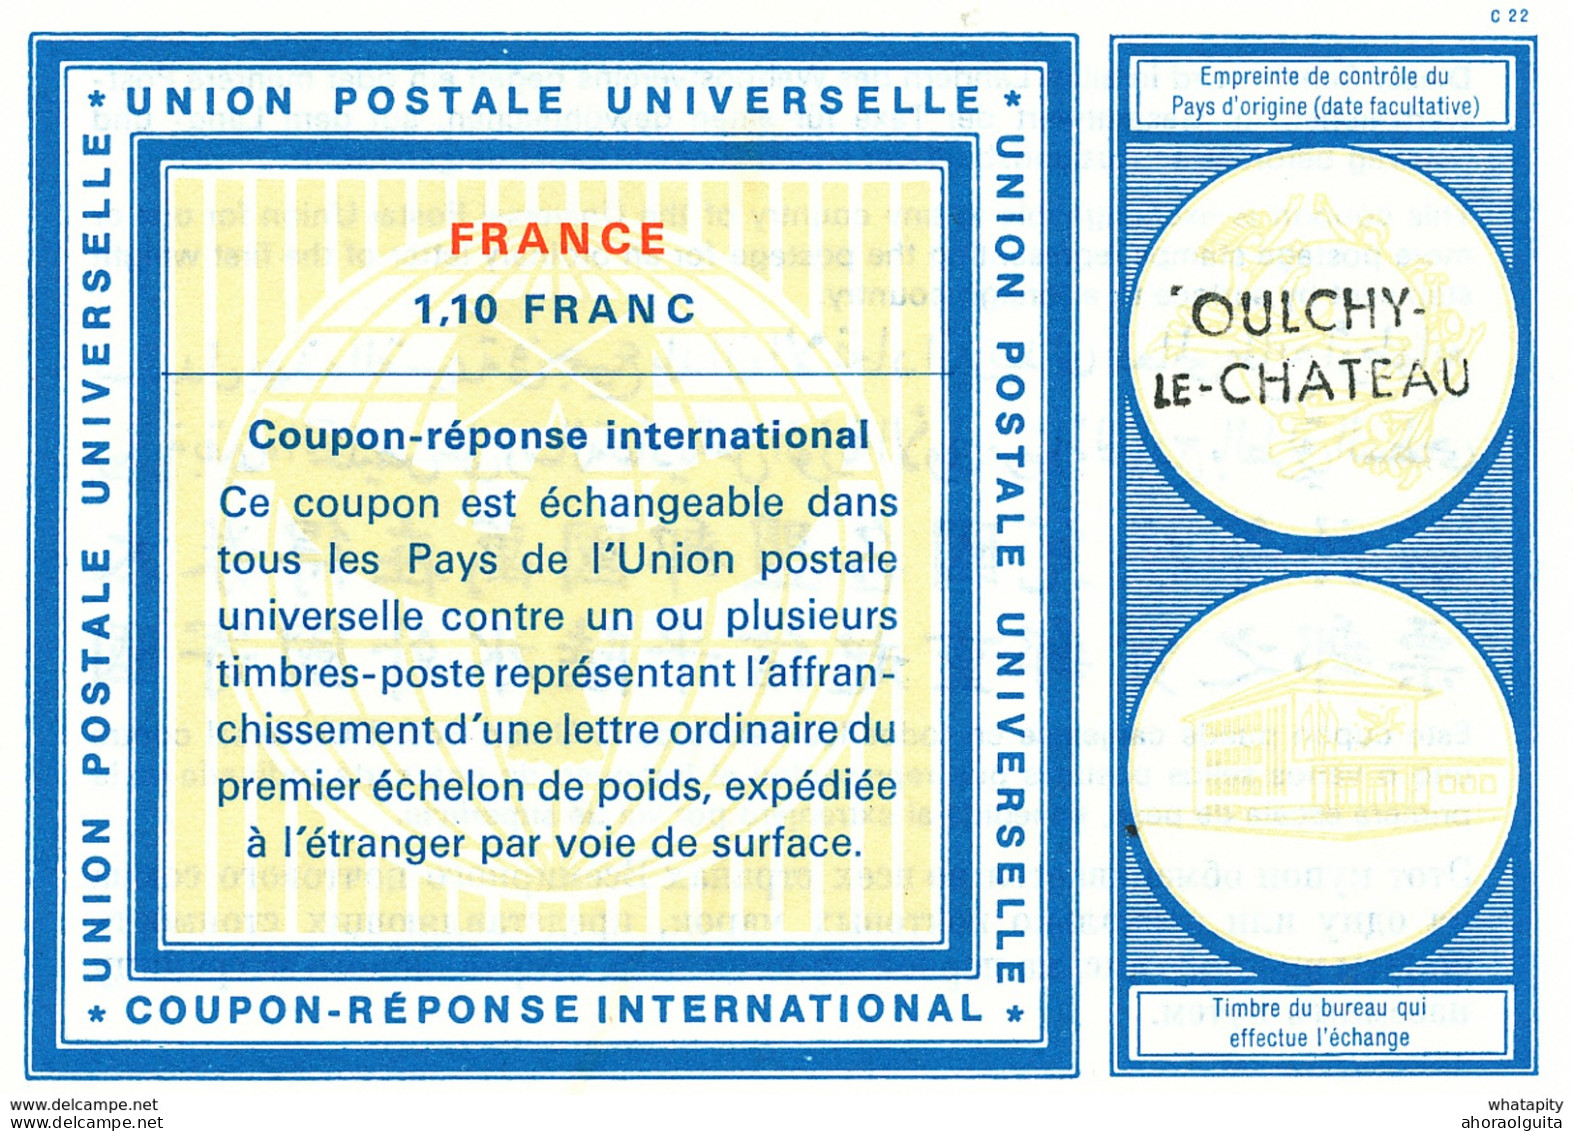 DT 388 -- FRANCE Coupon Réponse International ( IRC) 1.10 Francs  - Griffe OULCHY LE CHATEAU - Antwoordbons